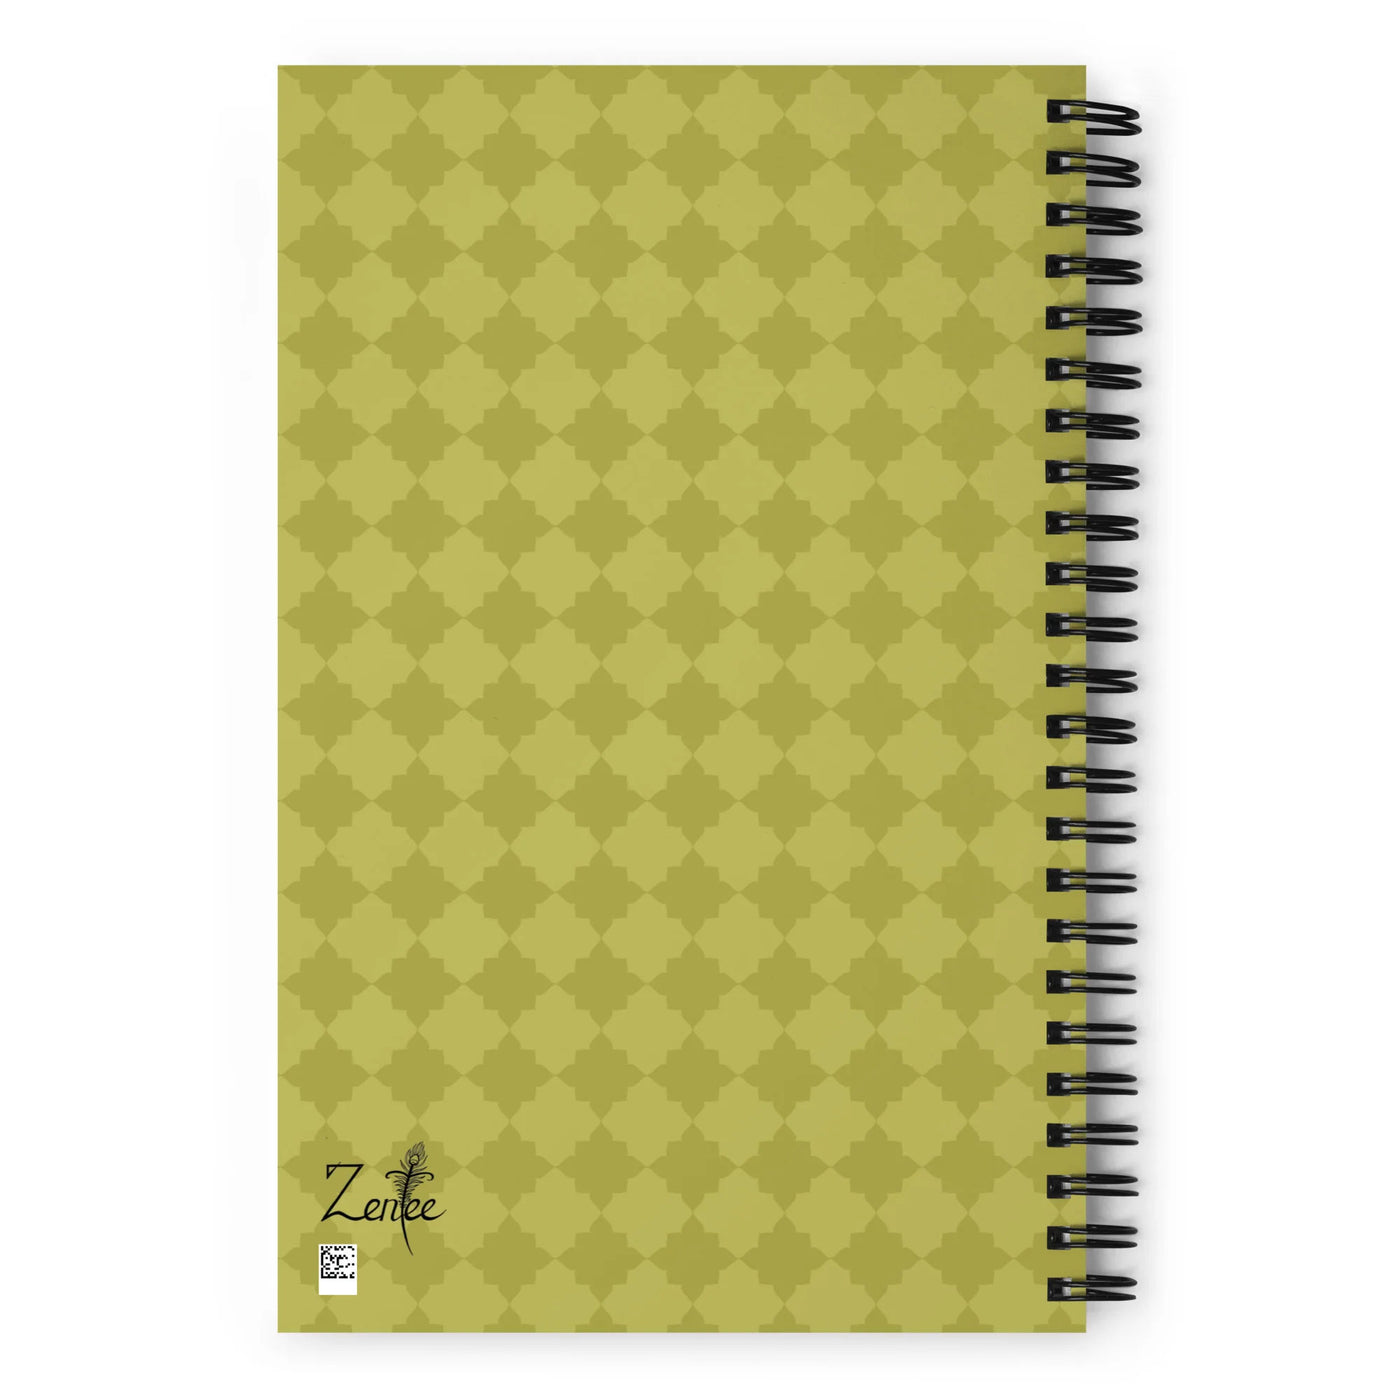 Look back at it - Spiral notebook